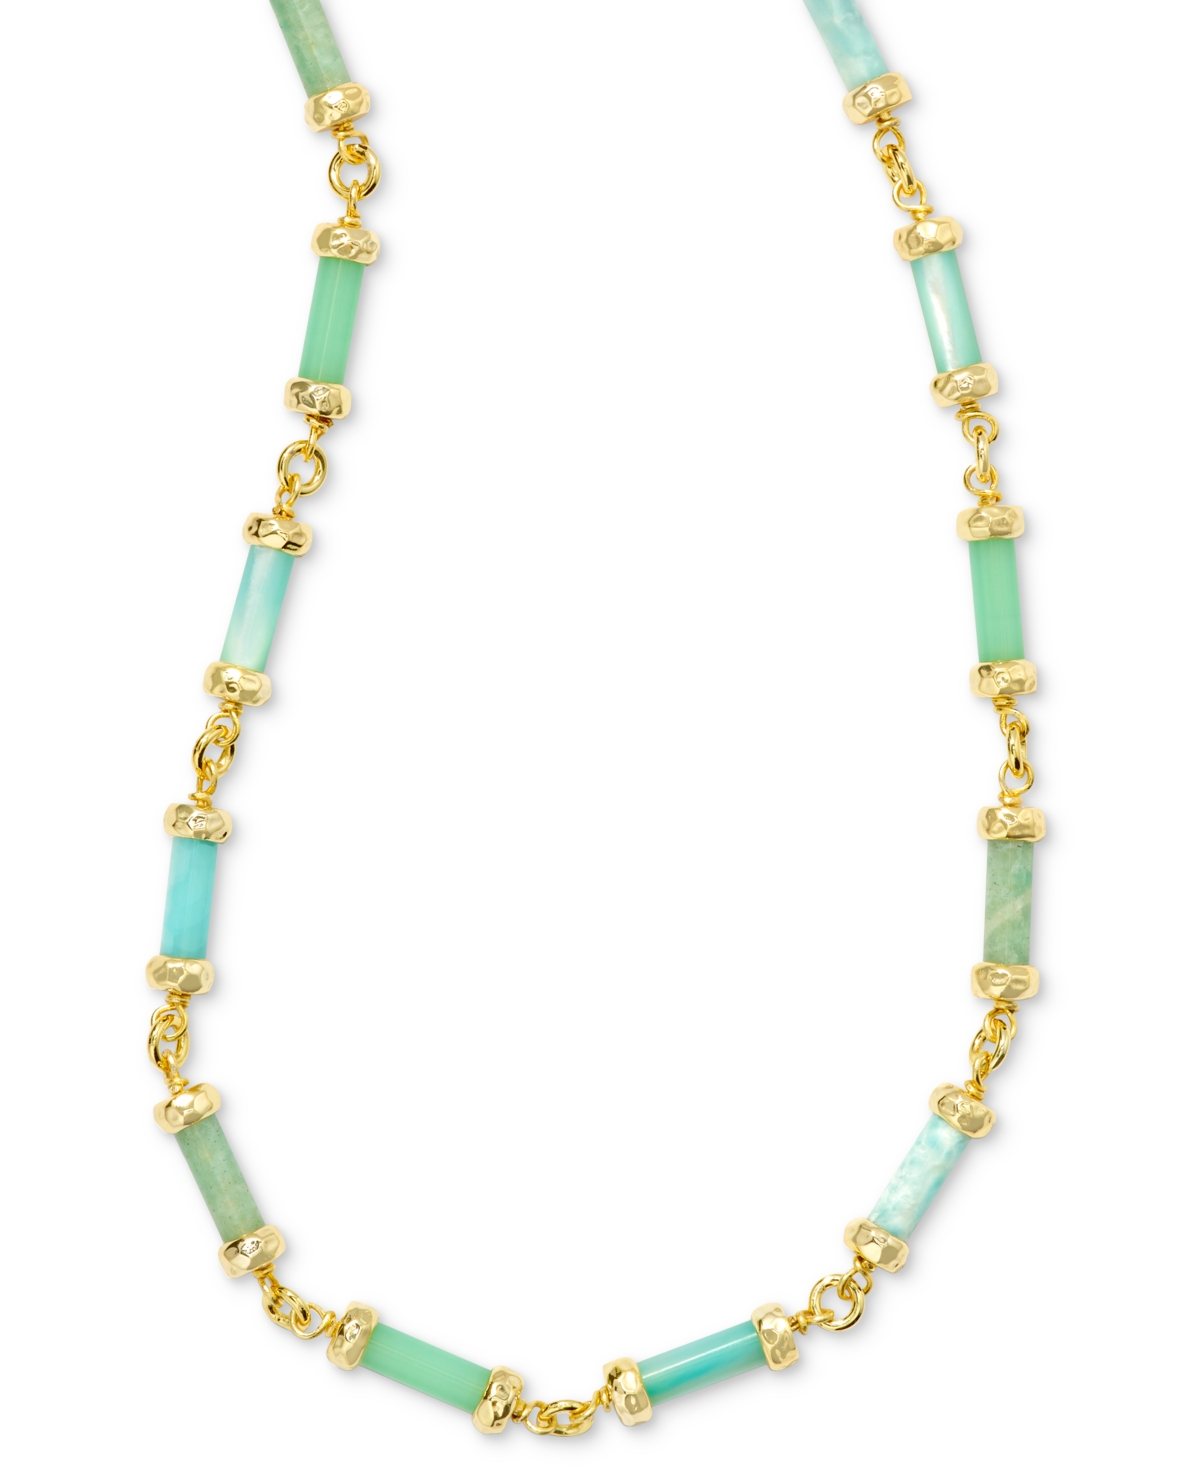 Kendra Scott 14k Gold-plated Mixed Bead Adjustable Strand Necklace, 14" + 5" Extender In Green